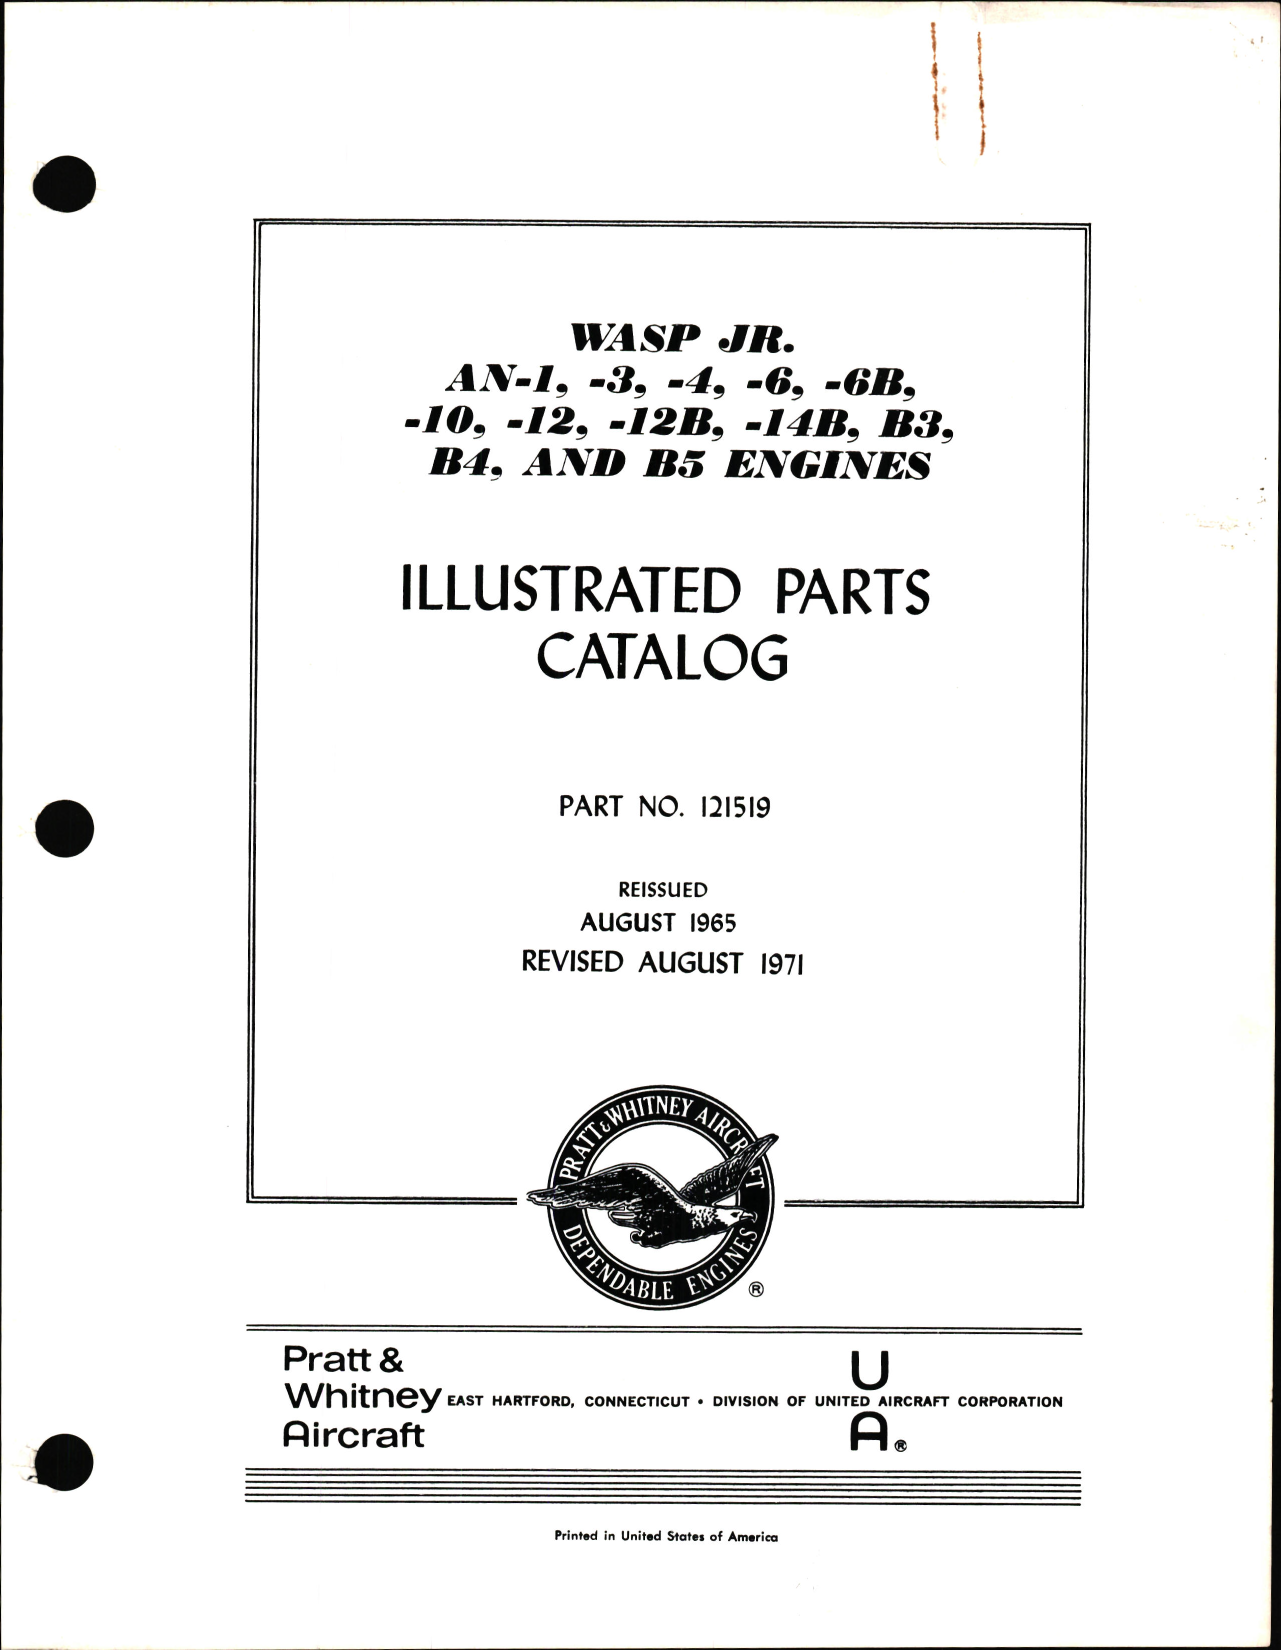 Sample page 1 from AirCorps Library document: Illustrated Parts Catalog for Wasp Jr Engines